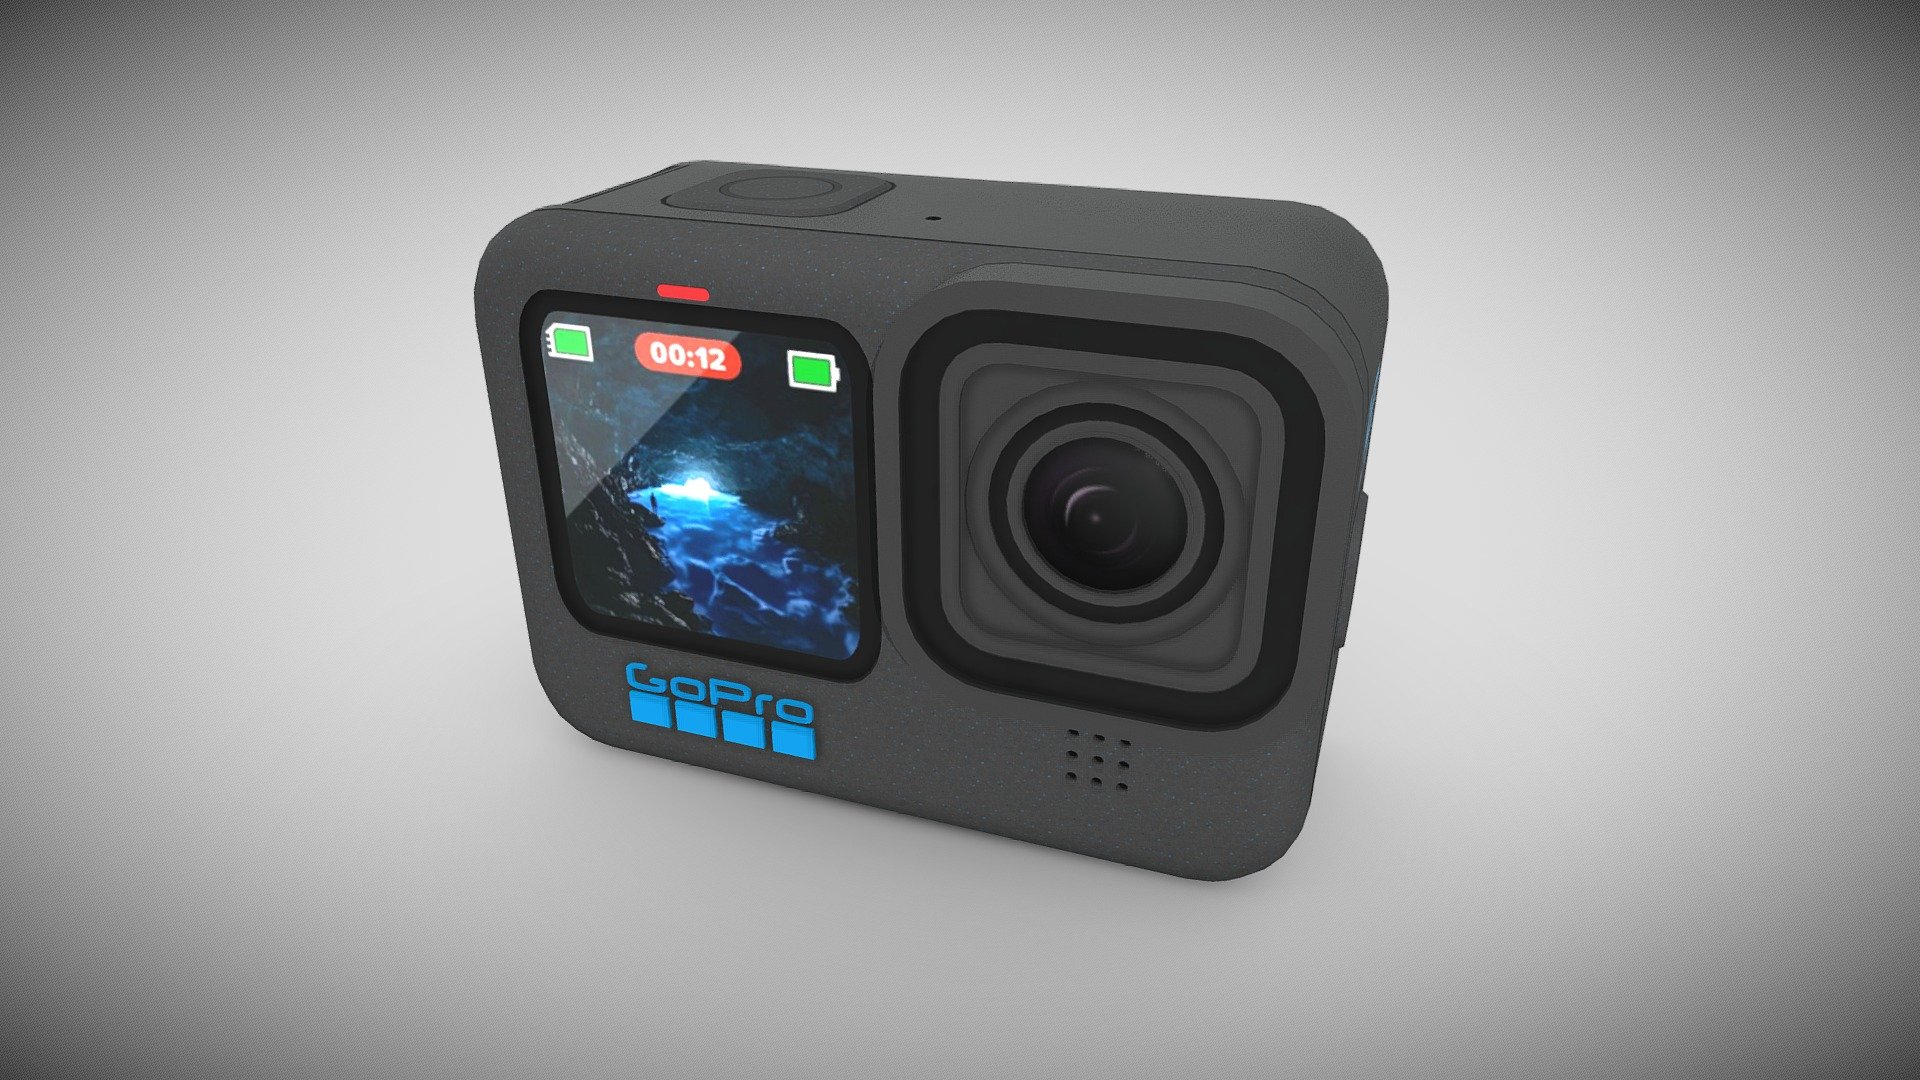 Low poly Gopro Hero 12 Black edition.
Designed in Blender and textured with Adobe Substance Painter 3d model